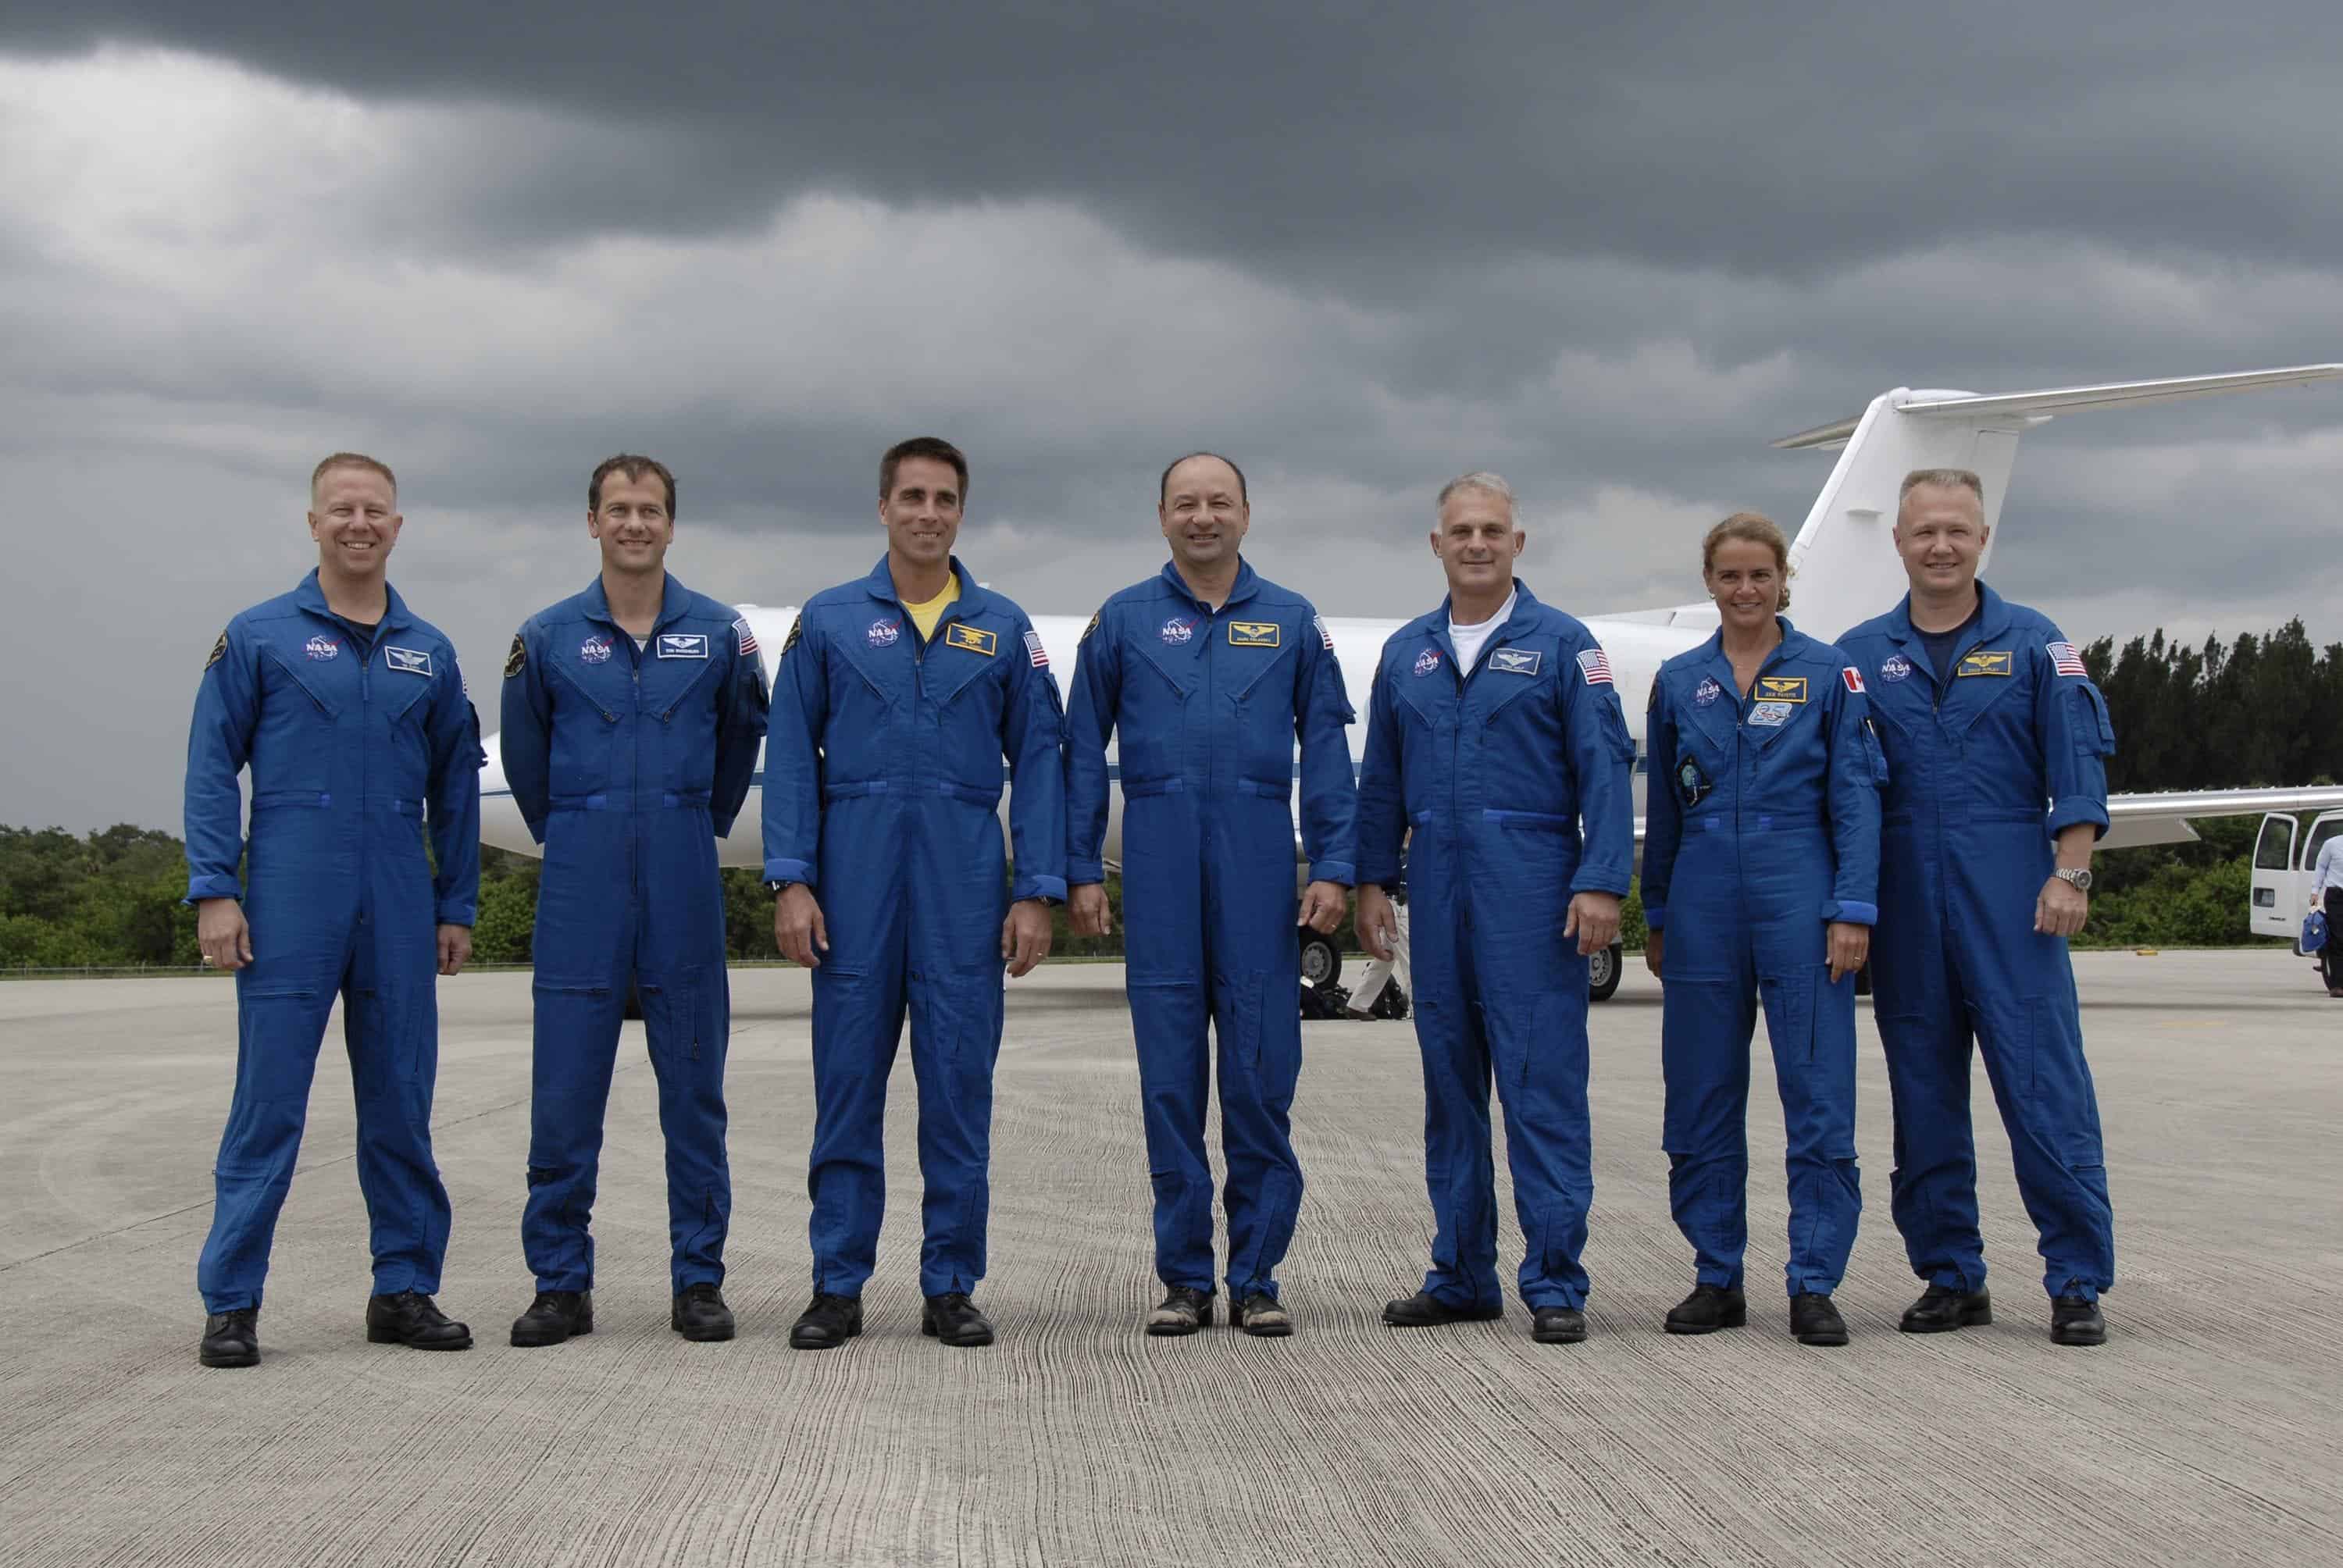 After arriving at NASA's Kennedy Space Center in Florida to prepare for space shuttle Endeavour's July 11 launch on the 29th assembly flight to the International Space Station, the STS-127 crew members pose for a final photo before leaving the Shuttle Landing Facility. Image credit: NASA/Kim Shiflett